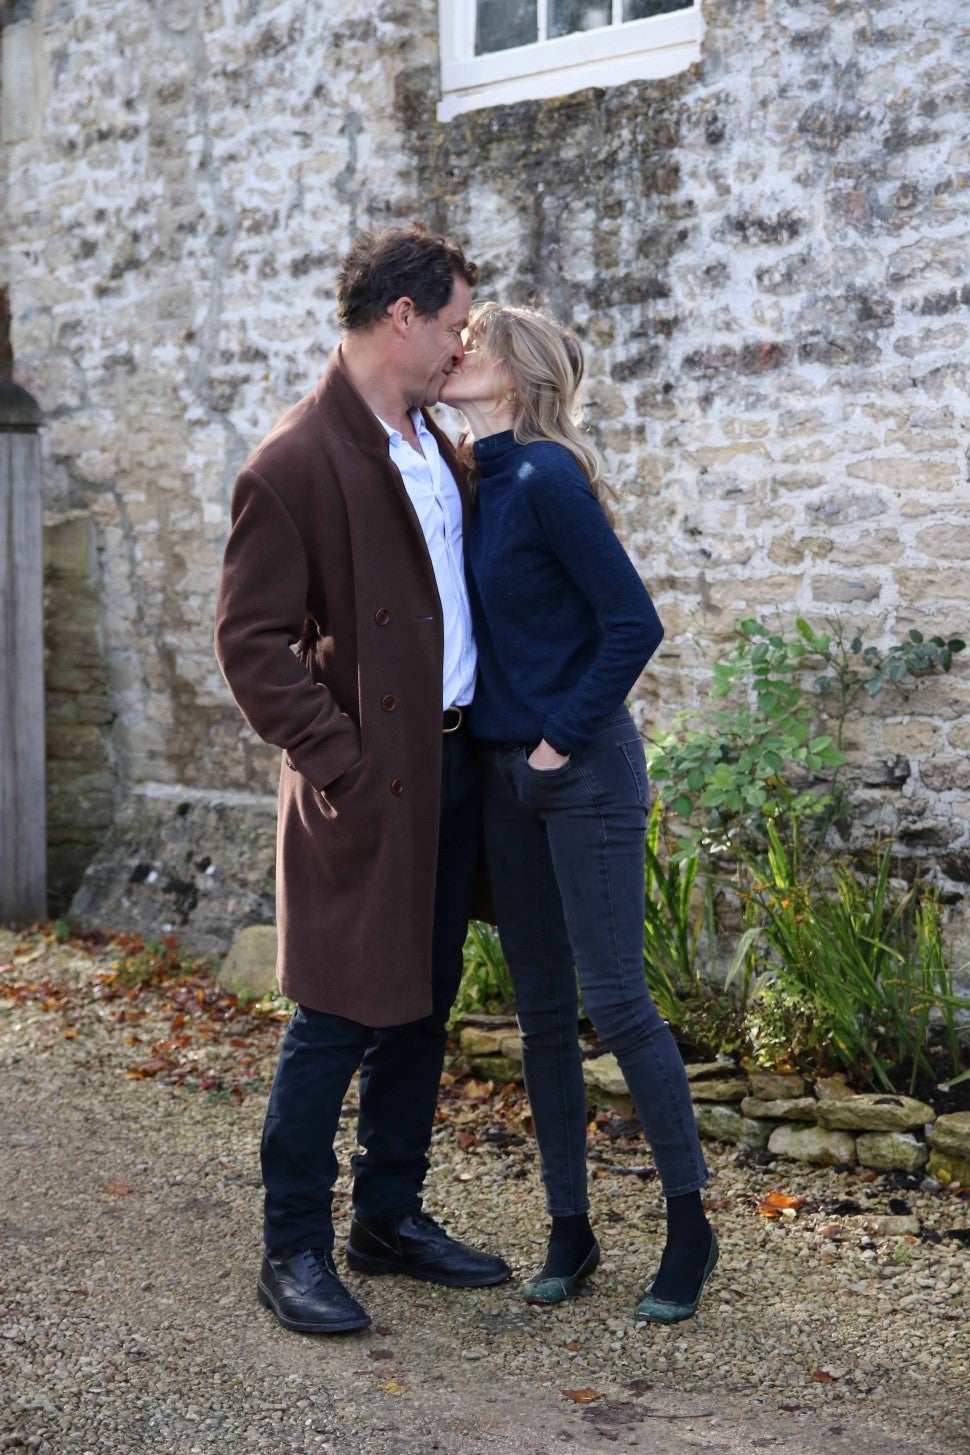 Dominic West and his wife Catherine Fitzgerald seen together at their family home after pictures emerged of the British actor kissing younger actress Lily James in Rome. The pair said they are staying together in a handwritten note that stated: "Our marriage is strong and we're very much still together. Thank you."